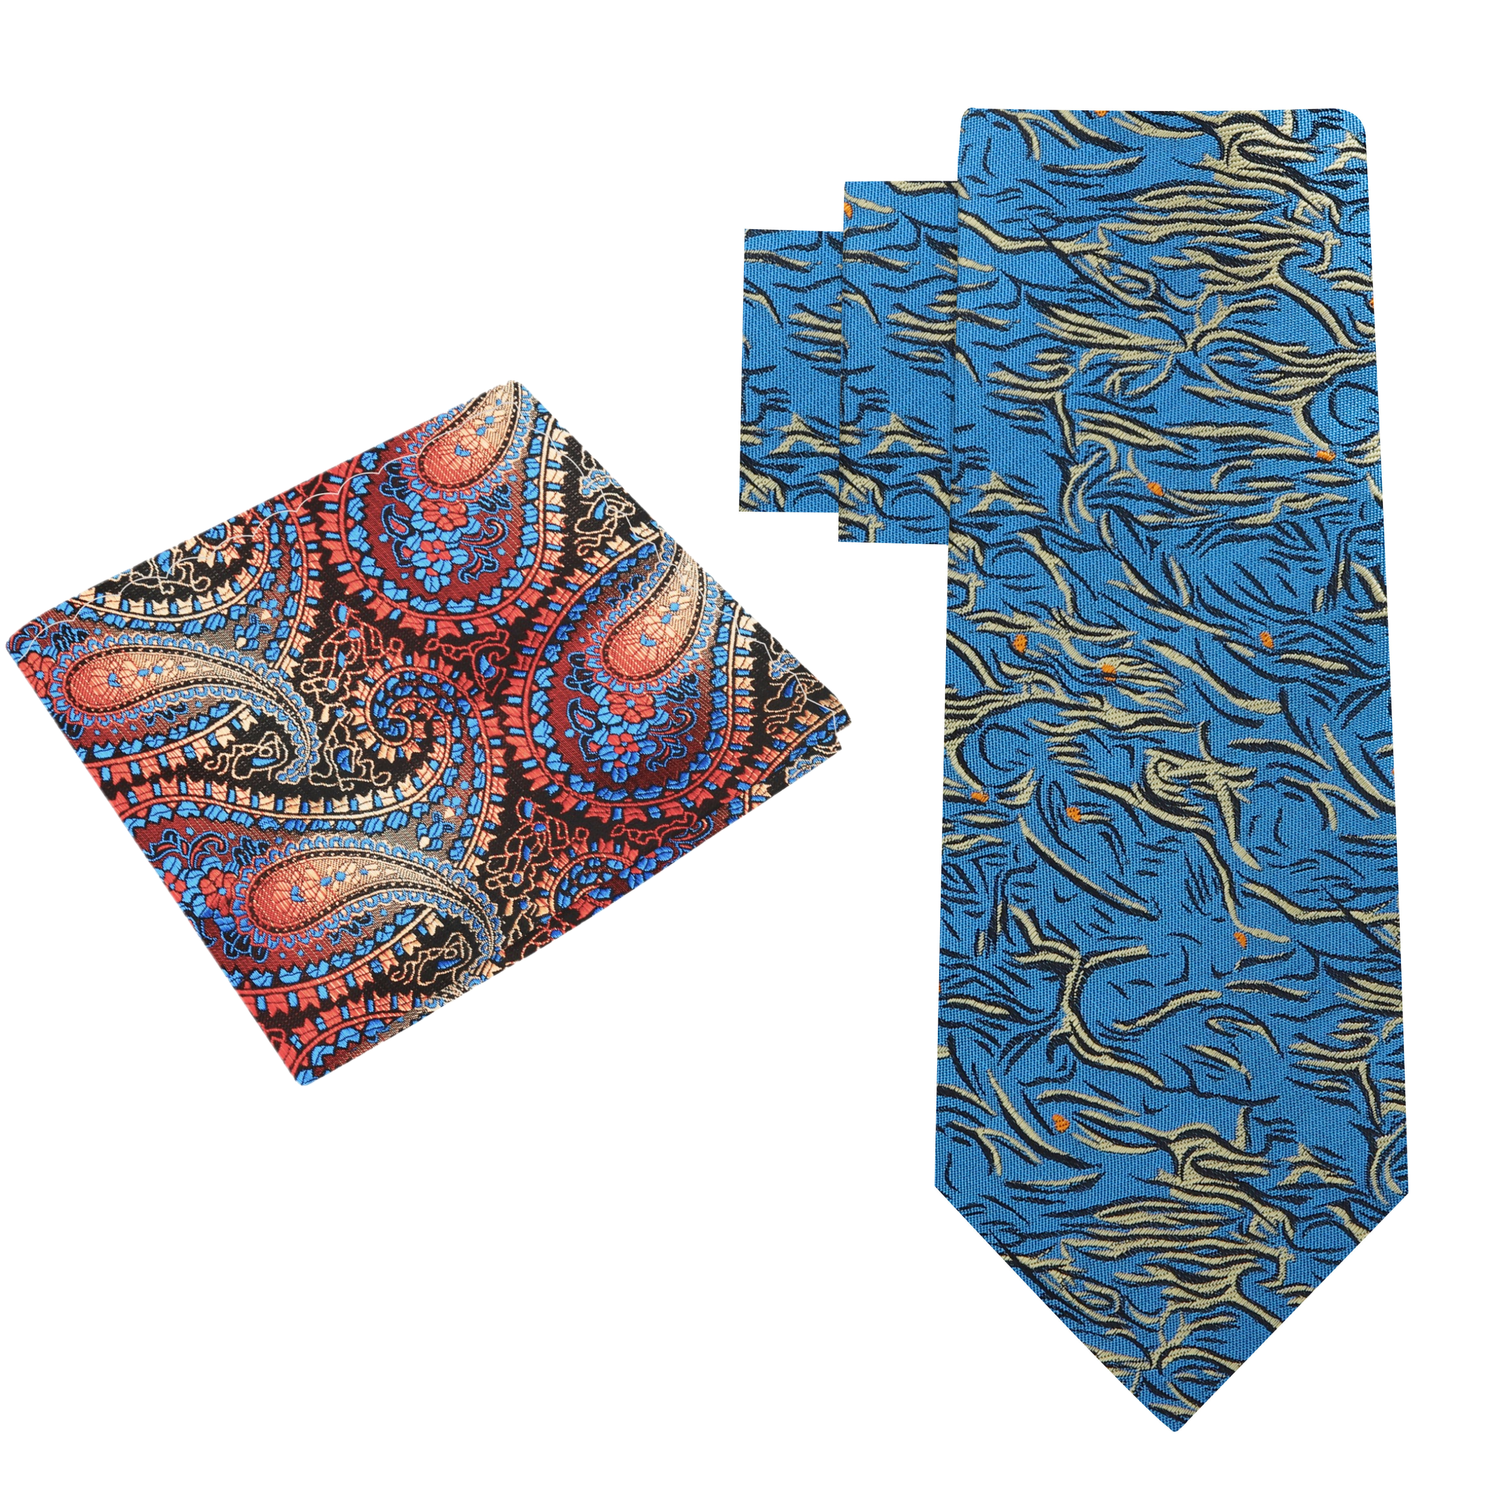 Alt view: Teal, Pale Gold and Orange Abstract Necktie with Orange, Brown and Blue Paisley Square